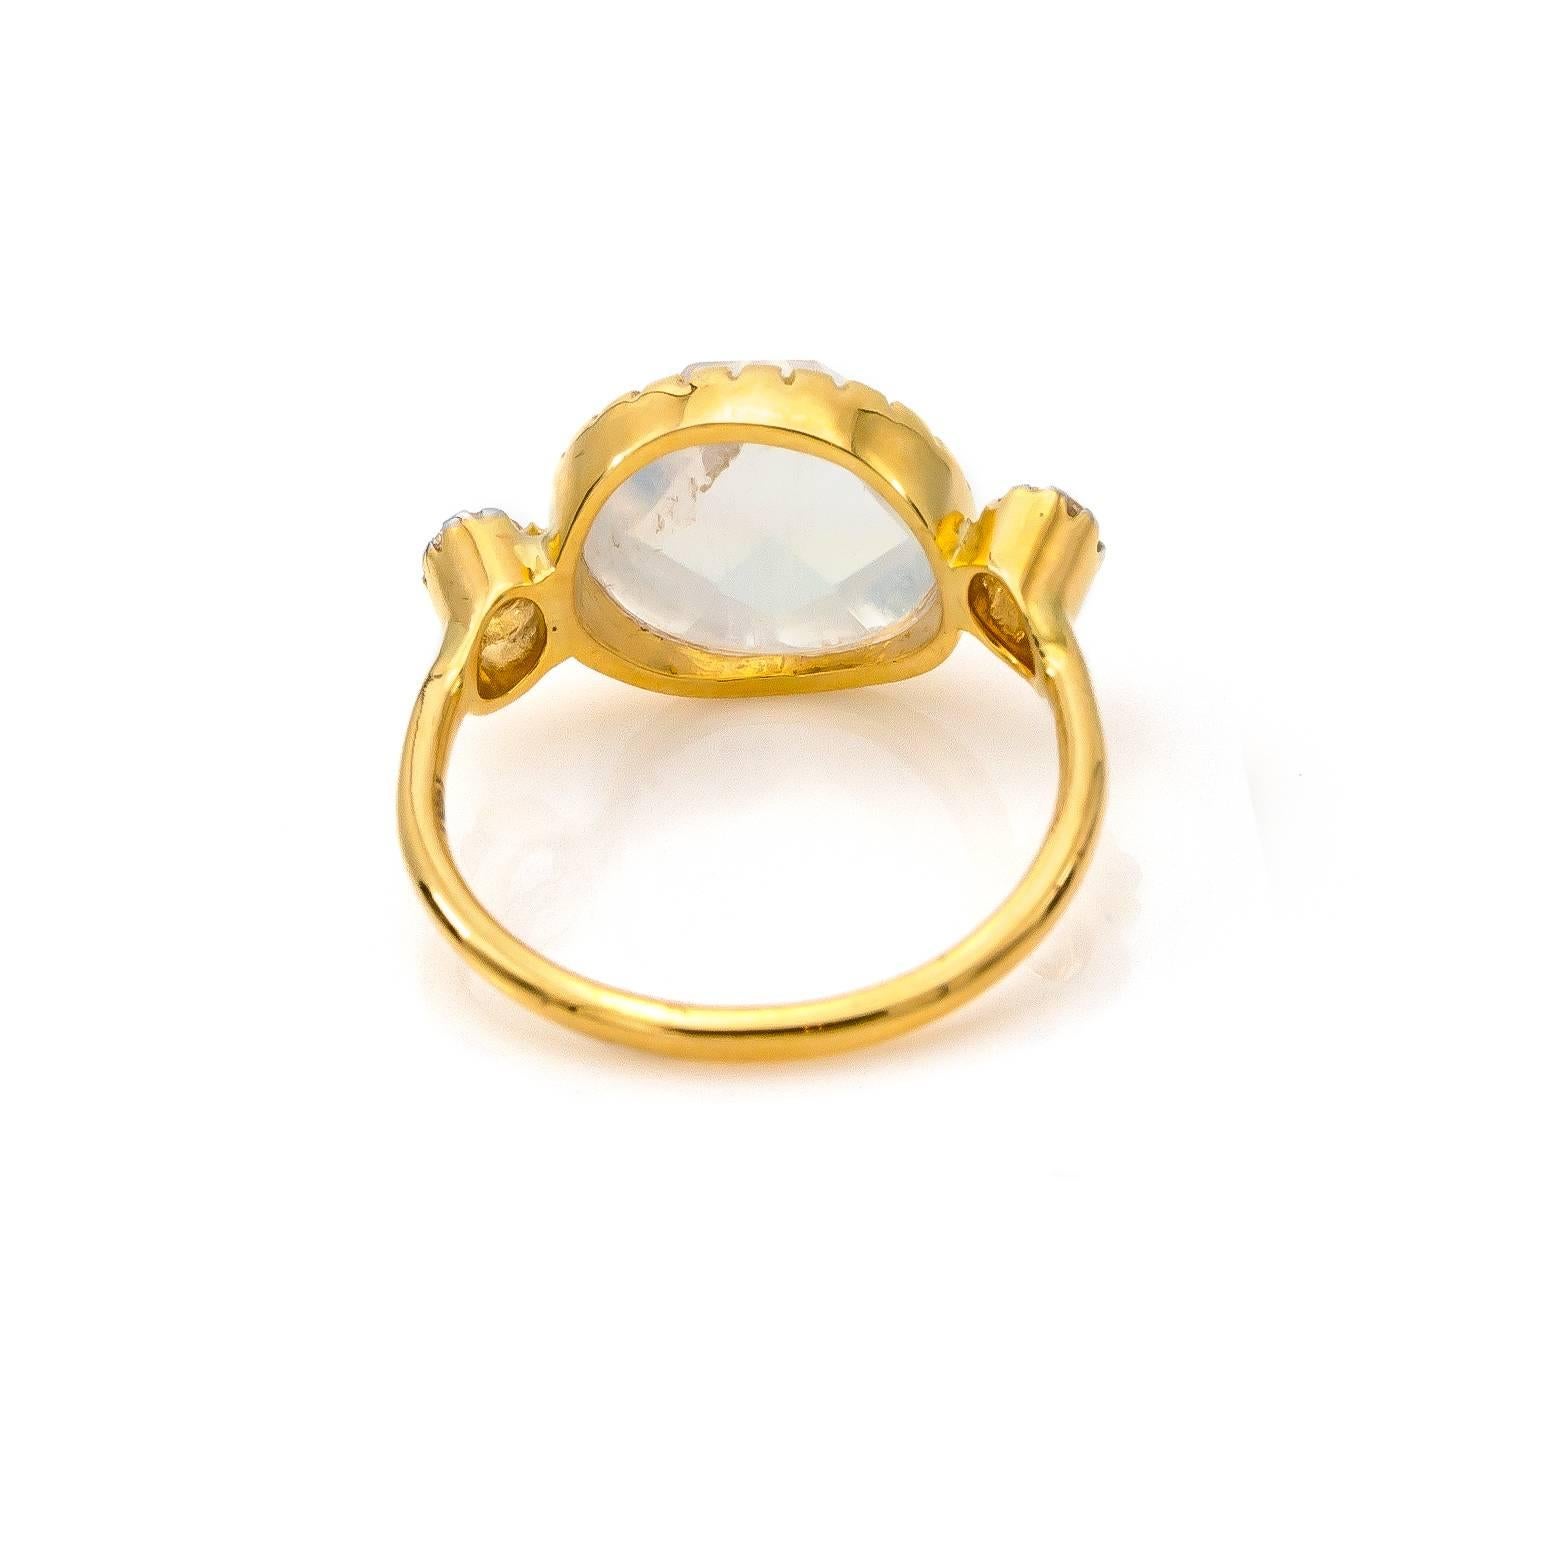 Oval Cut Diamond Rose Cut and Faceted Oval Moonstone Ring in 18 Karat Gold